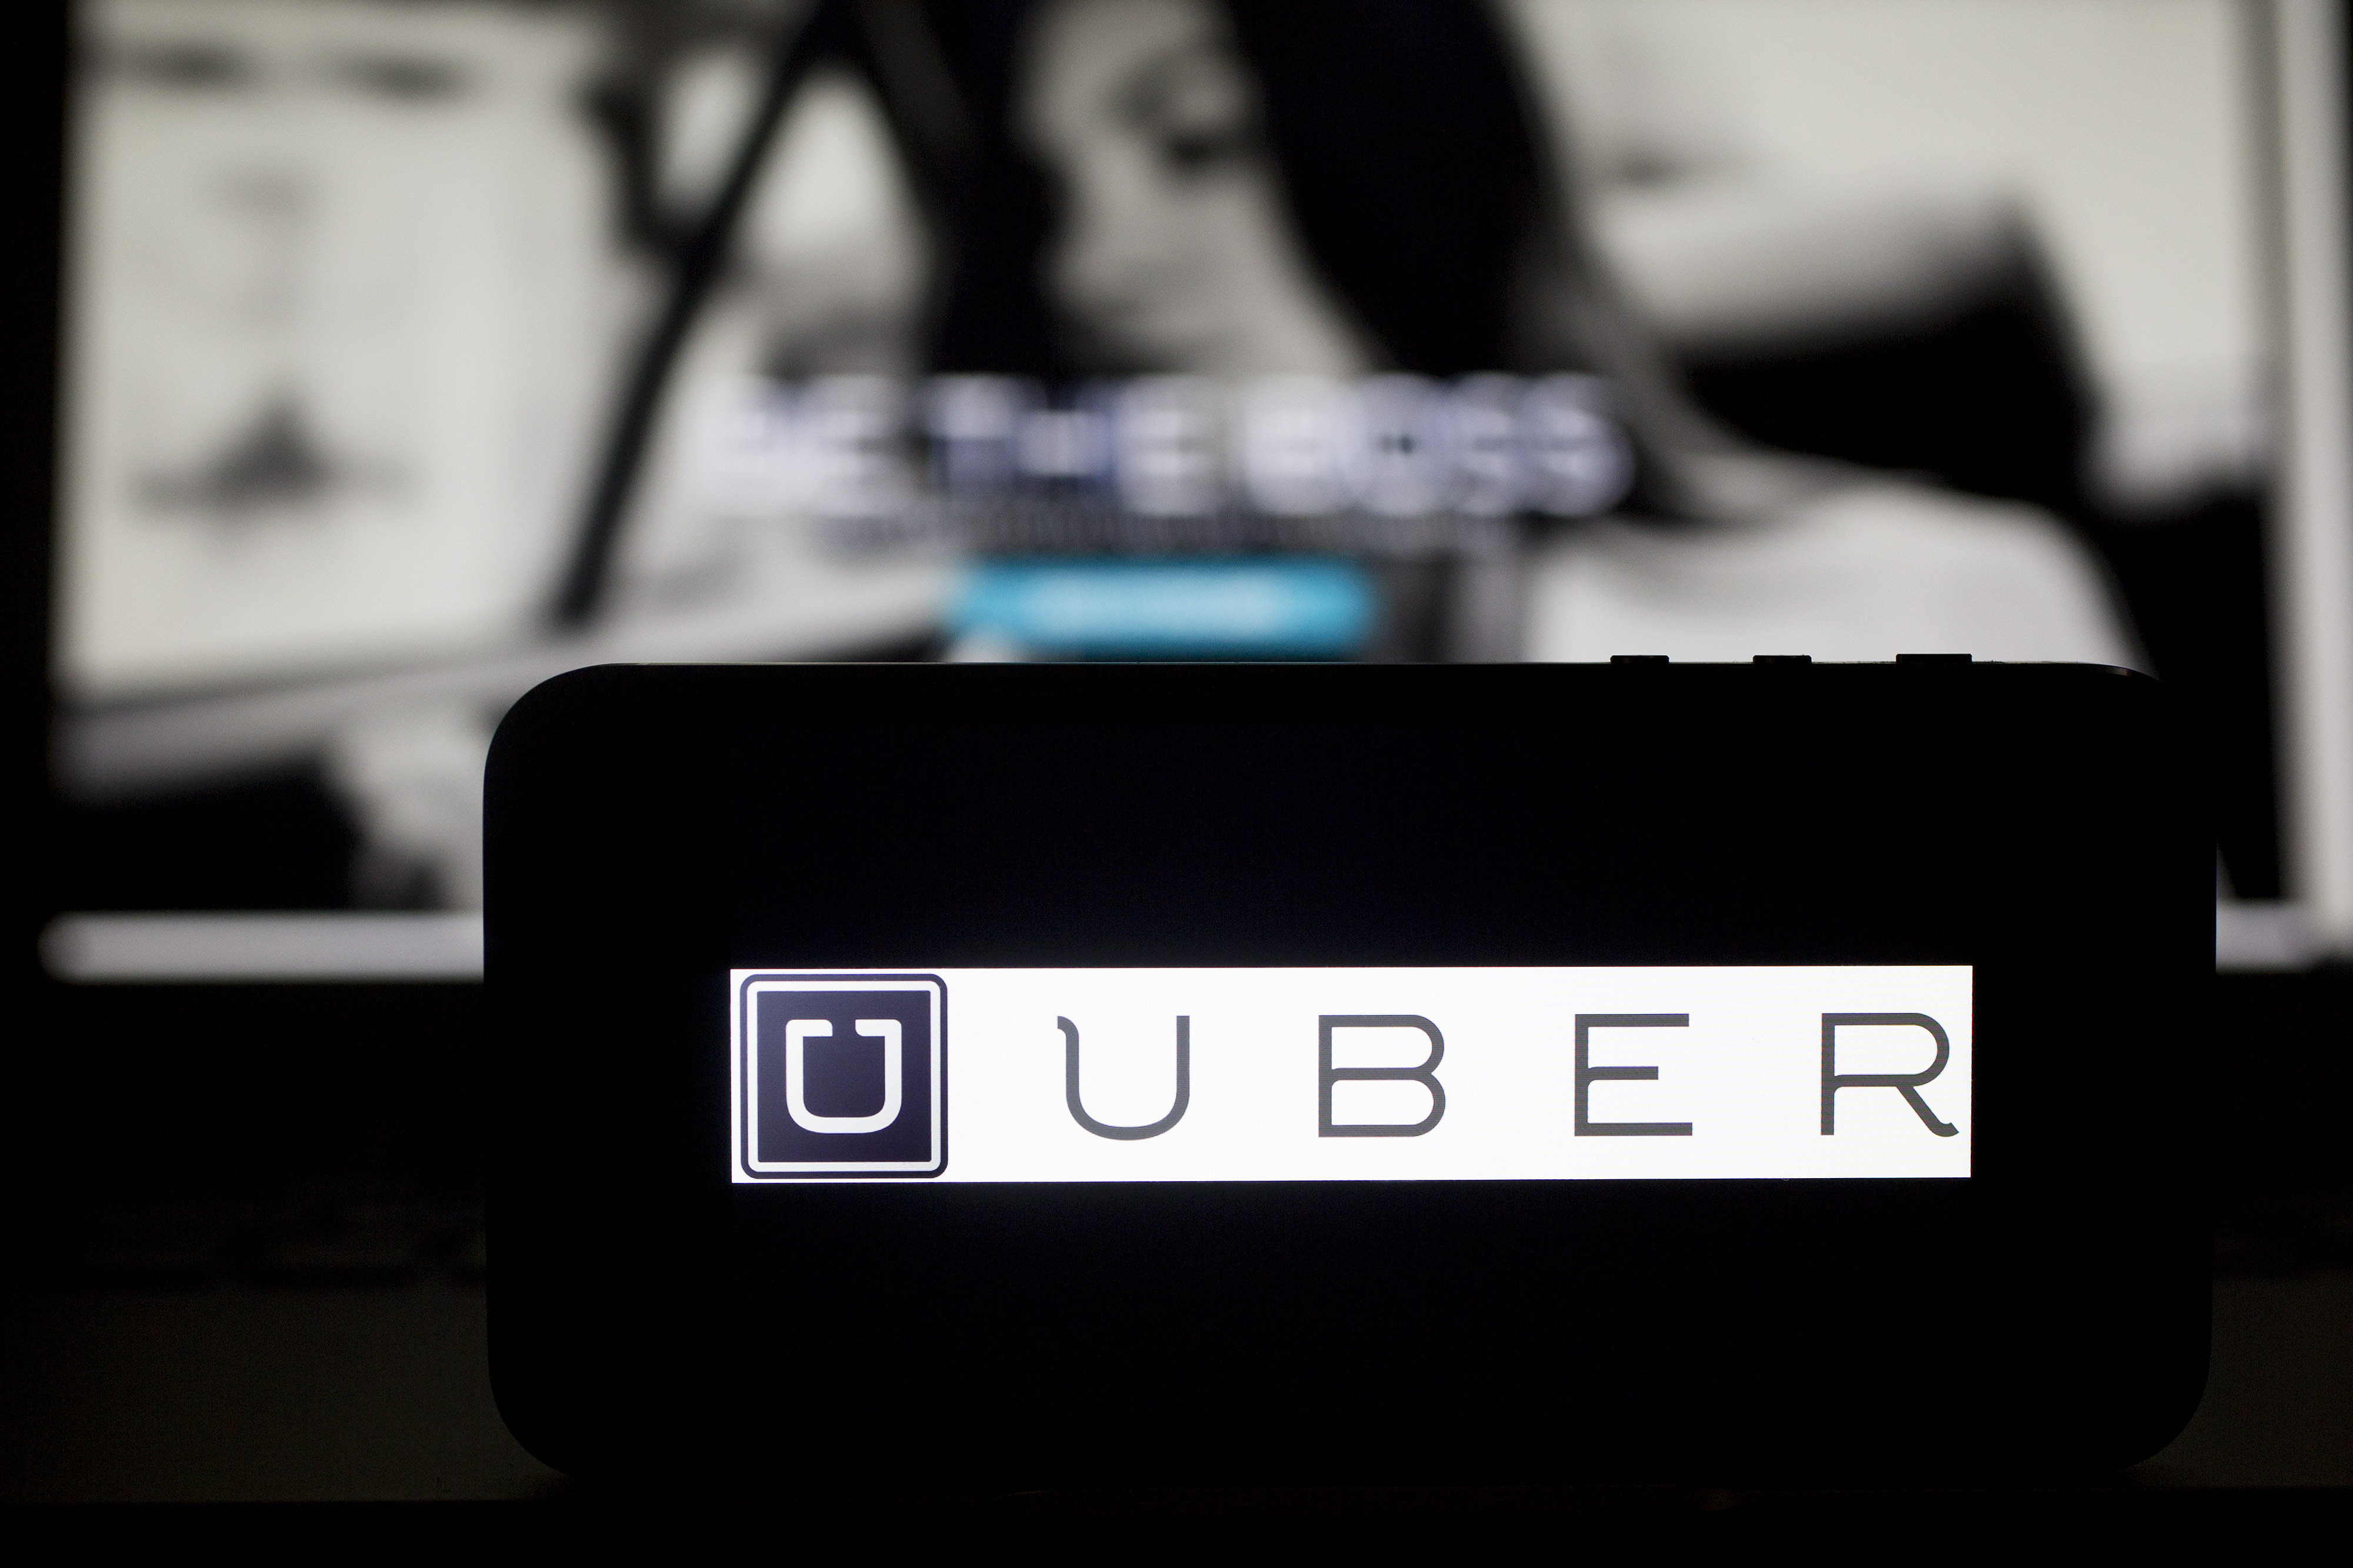 Uber Shows Taxis Never Same As Smartphones Roil U.S. Industry